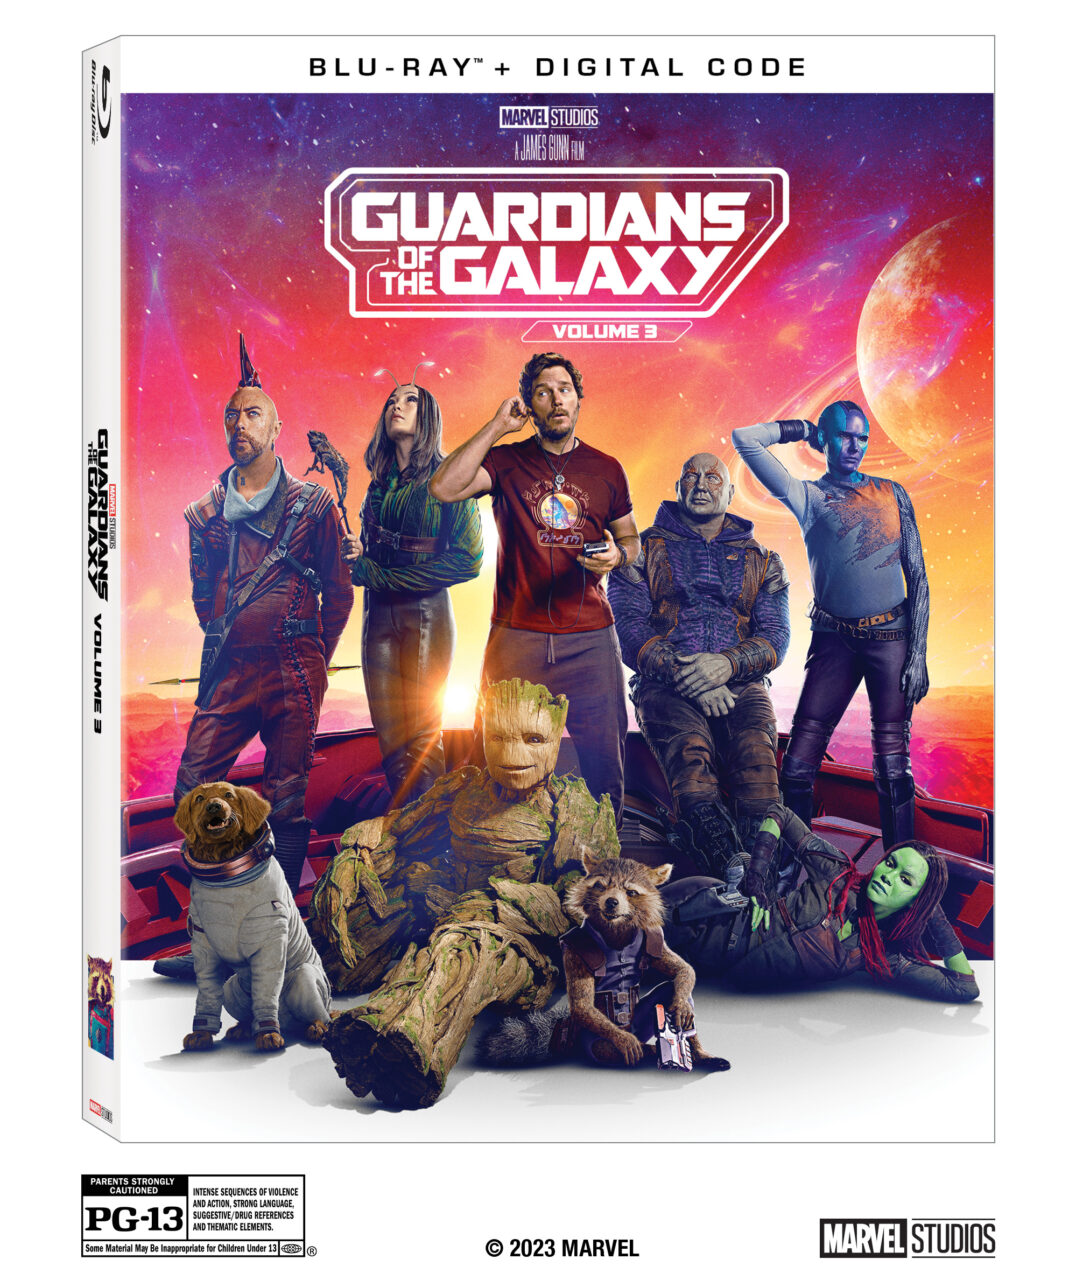 Guardians Of The Galaxy Volume 3 Blu-Ray Combo Pack cover (Marvel Studios/Walt Disney Home Entertainment)